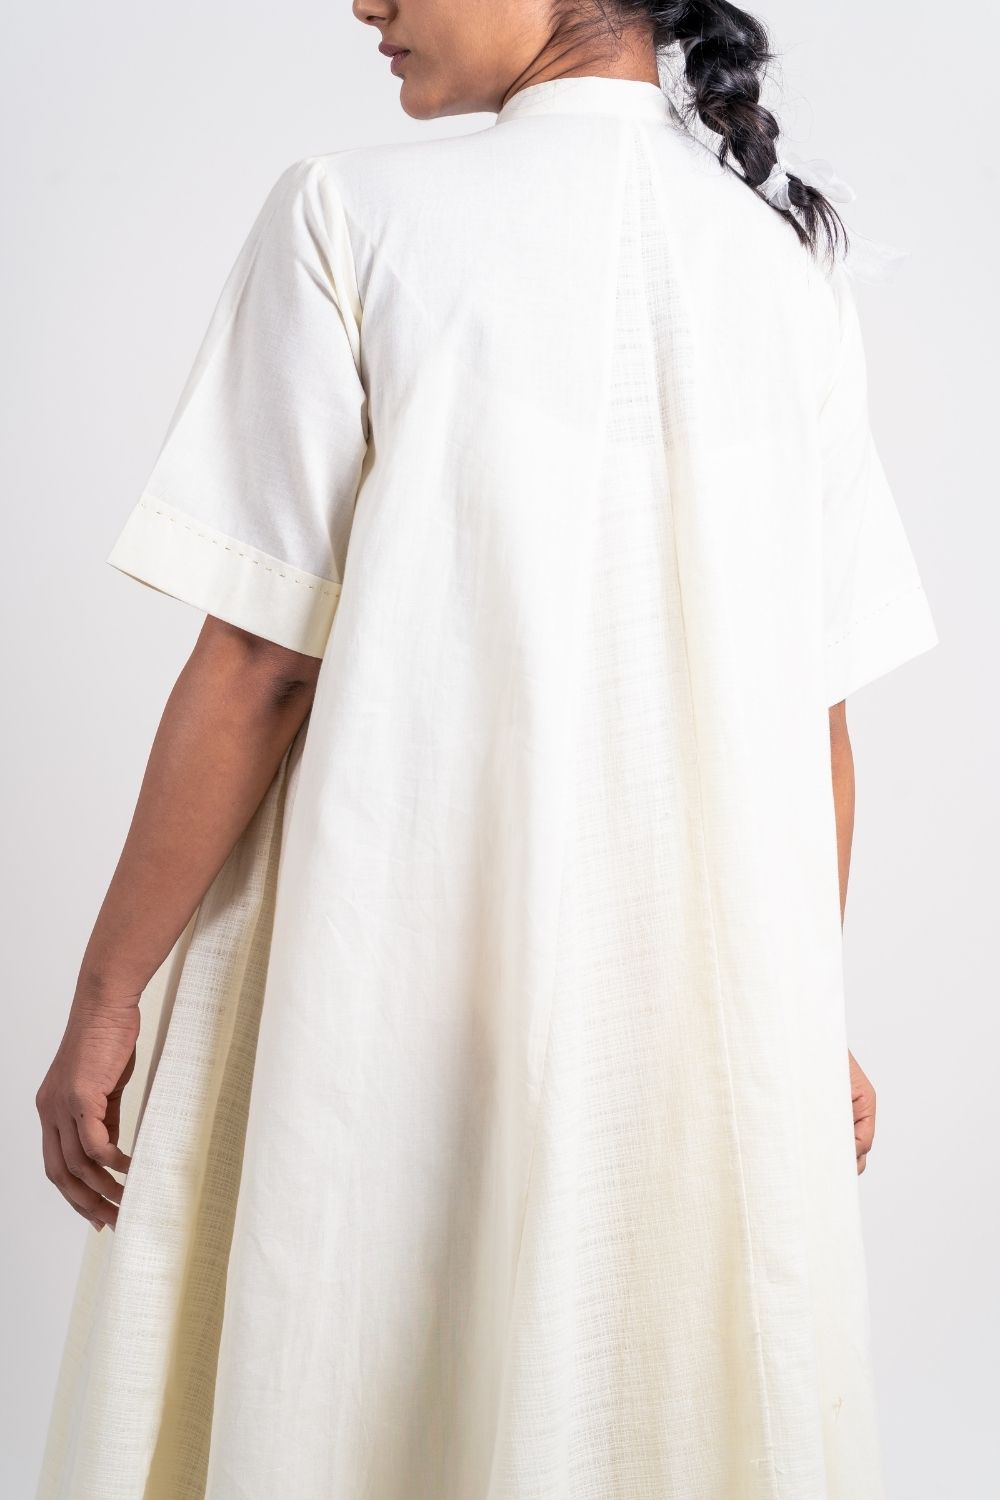 White Cotton Midi Dress Dresses Handloom Cotton, Dresses, Natural, Relaxed Fit, Solids, Ahmev Kamakhyaa